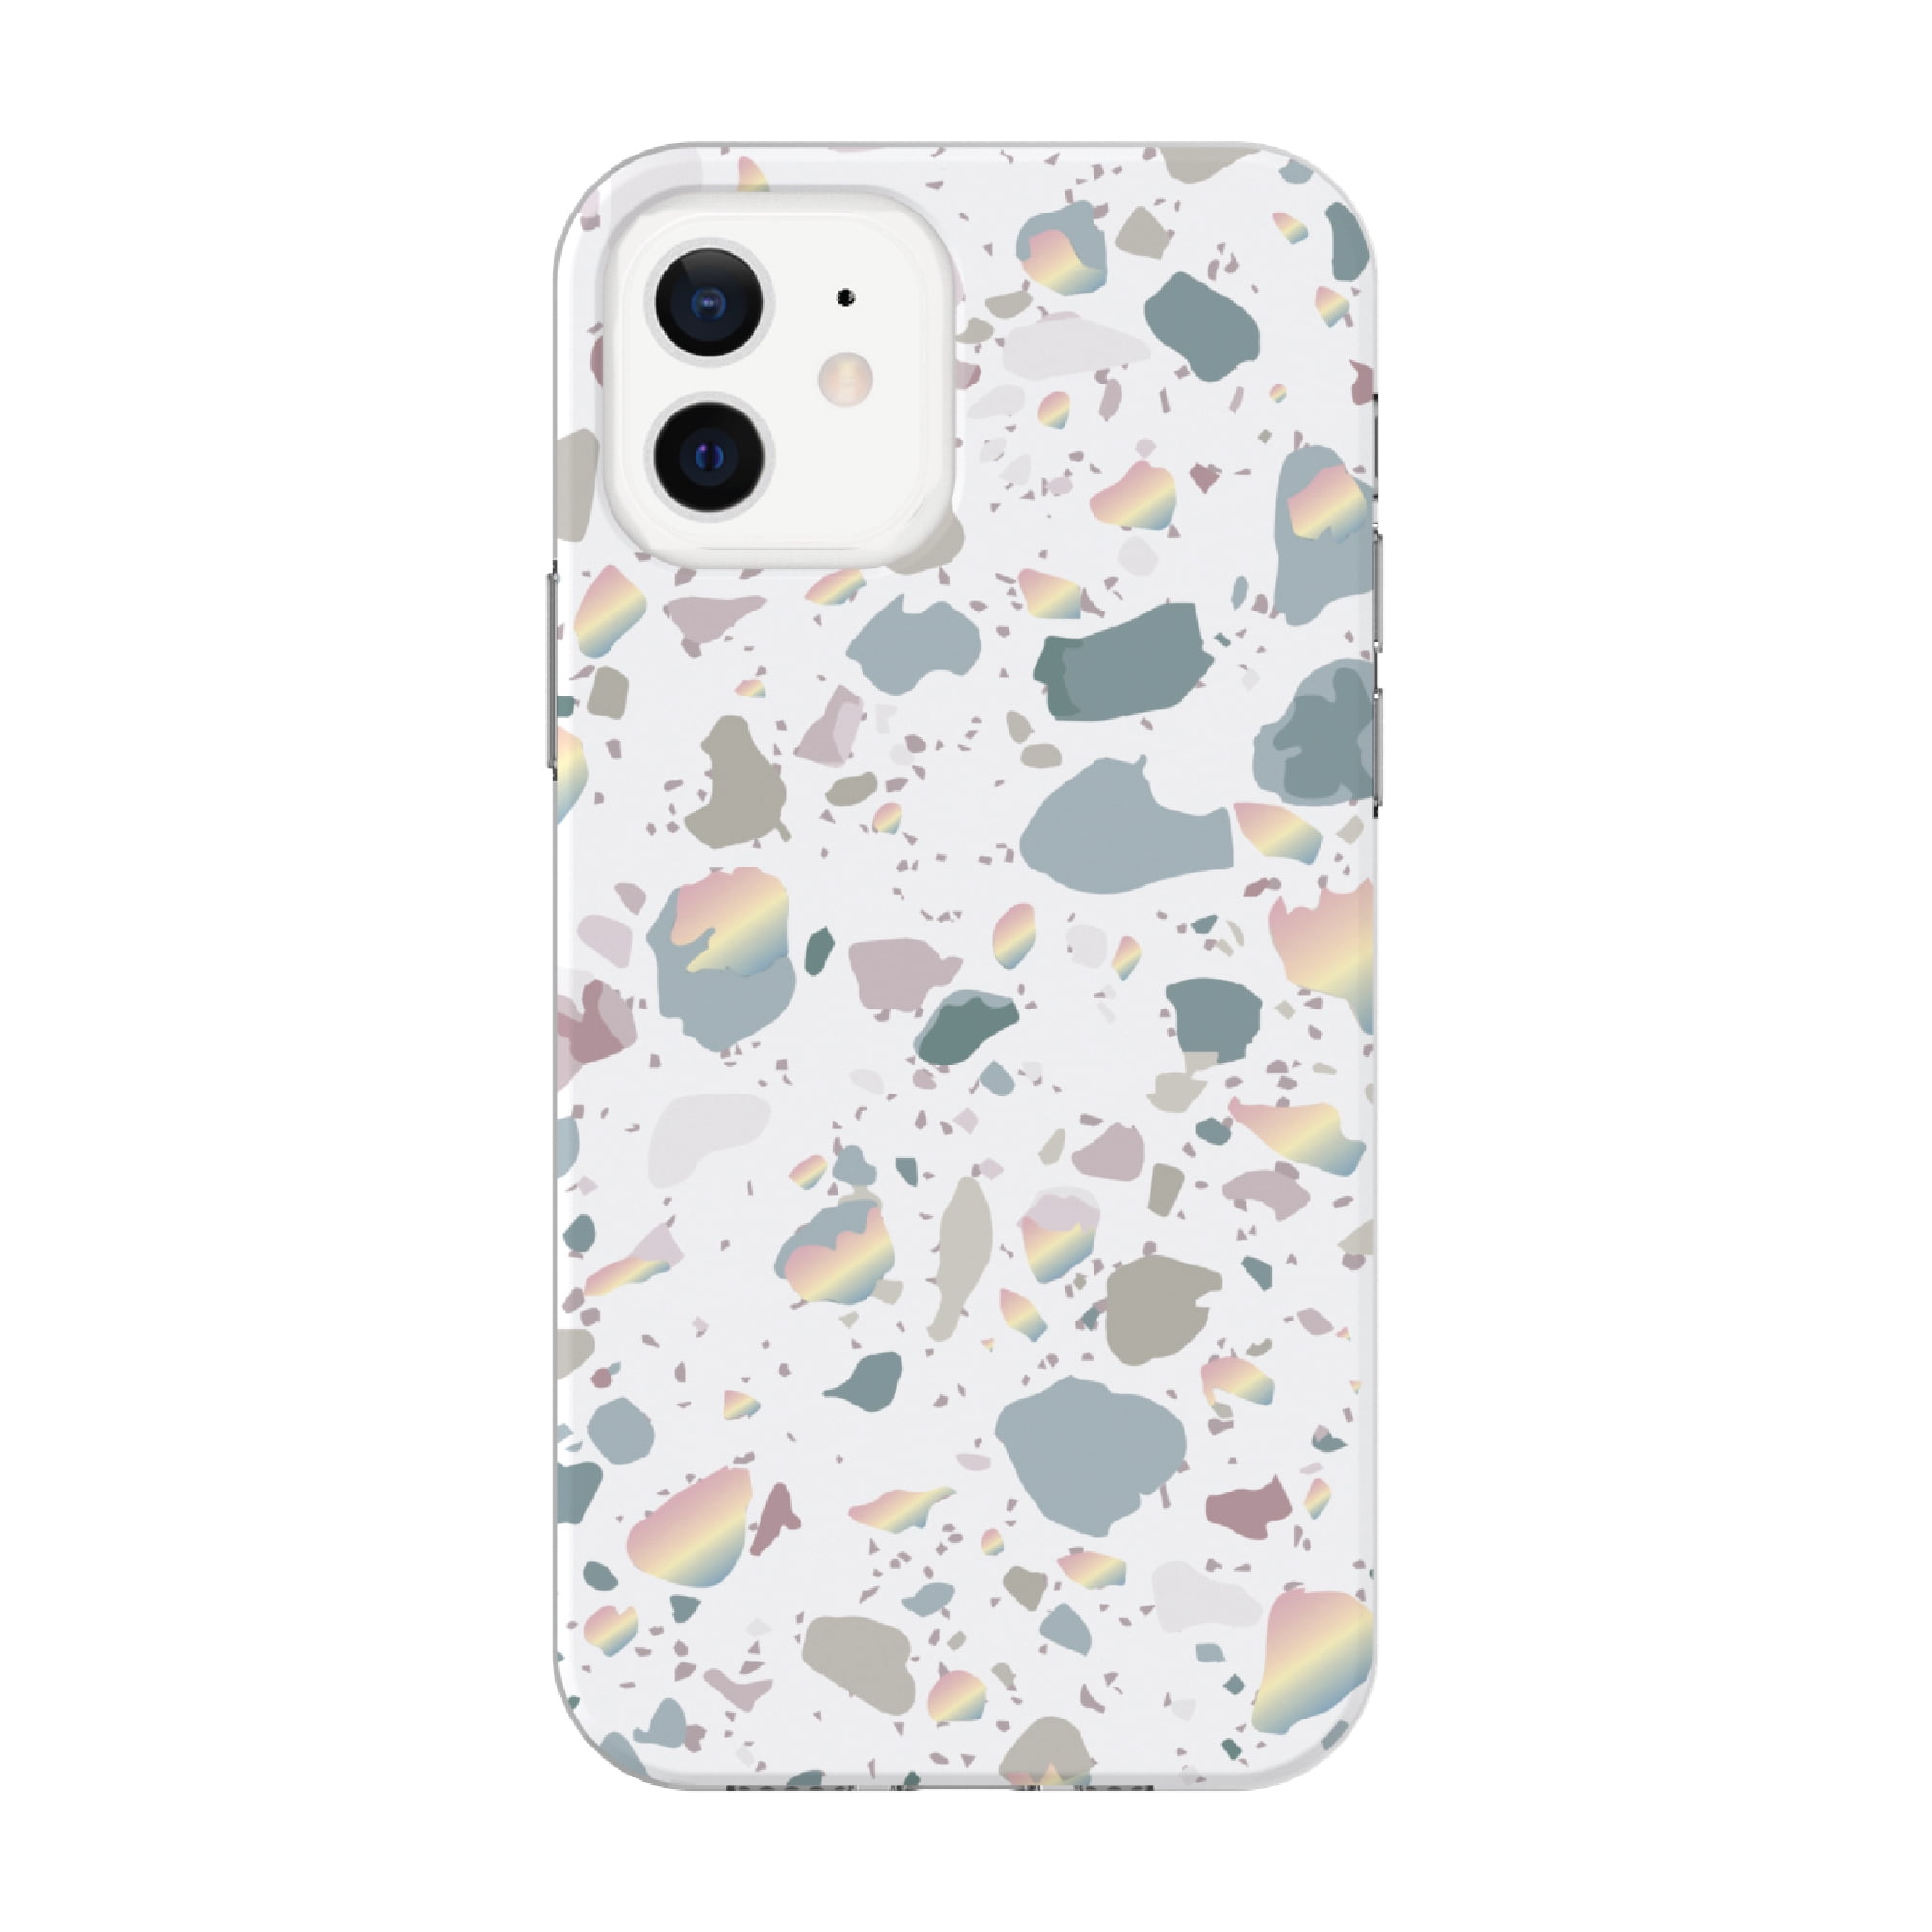 onn. Phone Case for iPhone 12 / iPhone 12 Pro - White Terrazzo